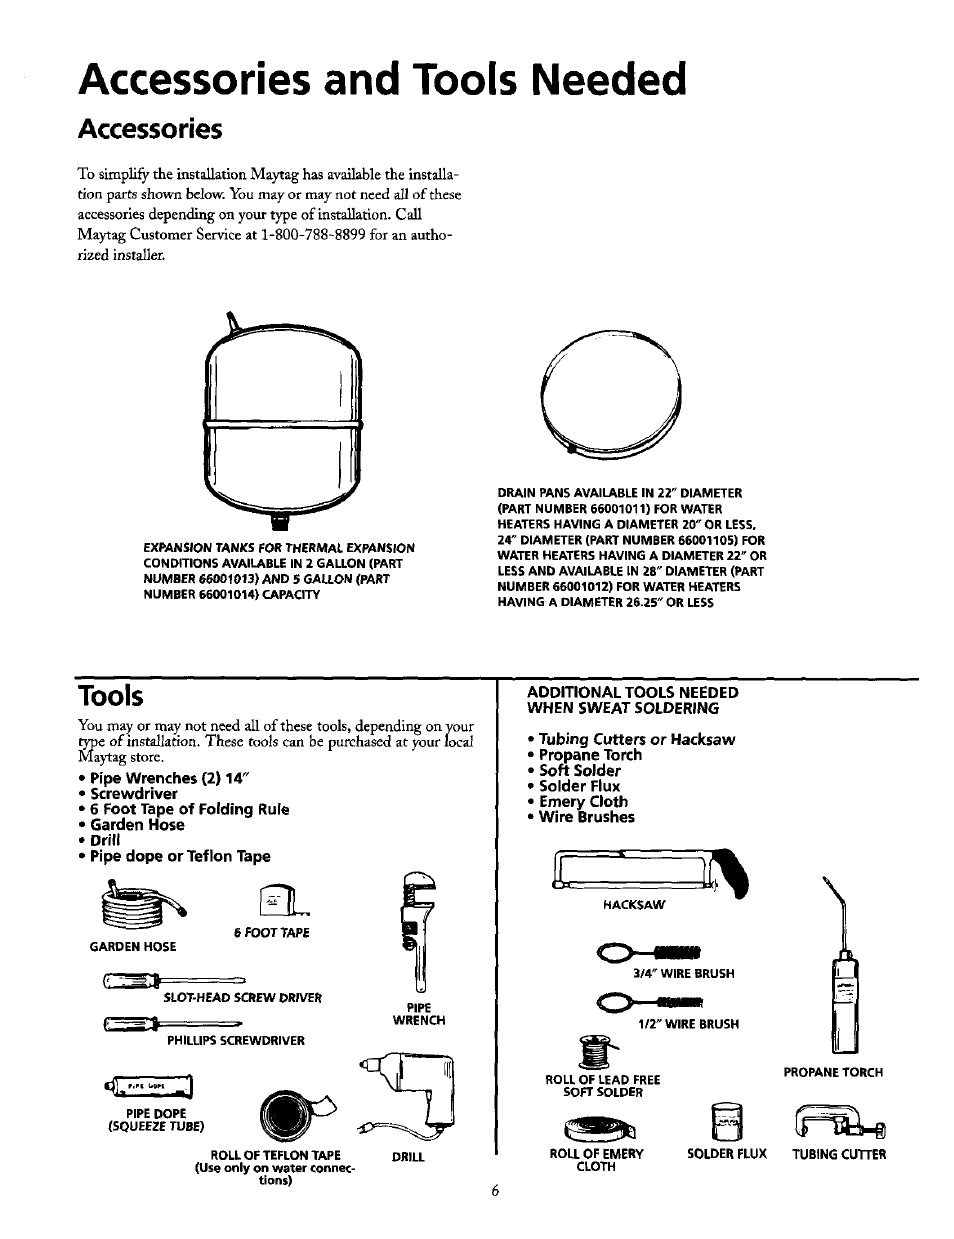 Accessories and tools needed, Accessories, Tools | Pipe wrenches (2) 14, Screwdriver, 6 foot tape of folding rule, Garden hose, Drill, Pipe dope or teflon tape, Additional tools needed when sweat soldering | Maytag HE21250PC User Manual | Page 6 / 40